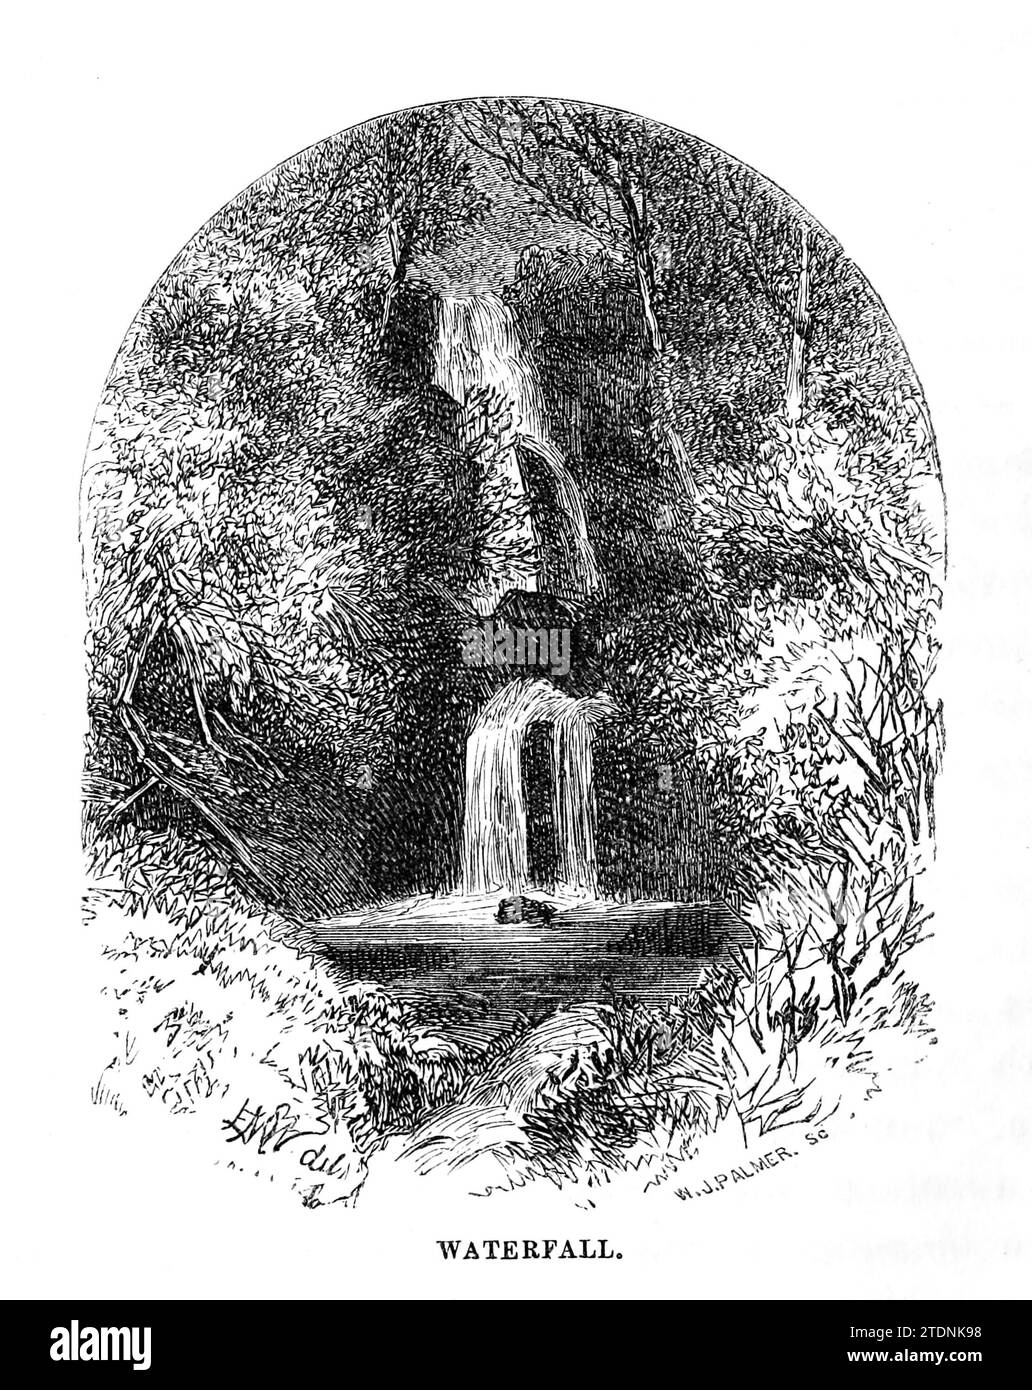 Waterfall from the book The Severn valley: a series of sketches, descriptive and pictorial, of the course of the Severn: containing notices of its topographical, industrial, and geological features; with glances at its historical and legendary associations by Randall, John, 1810-1910 Publication date 1862 Publisher J. S. Virtue Stock Photo